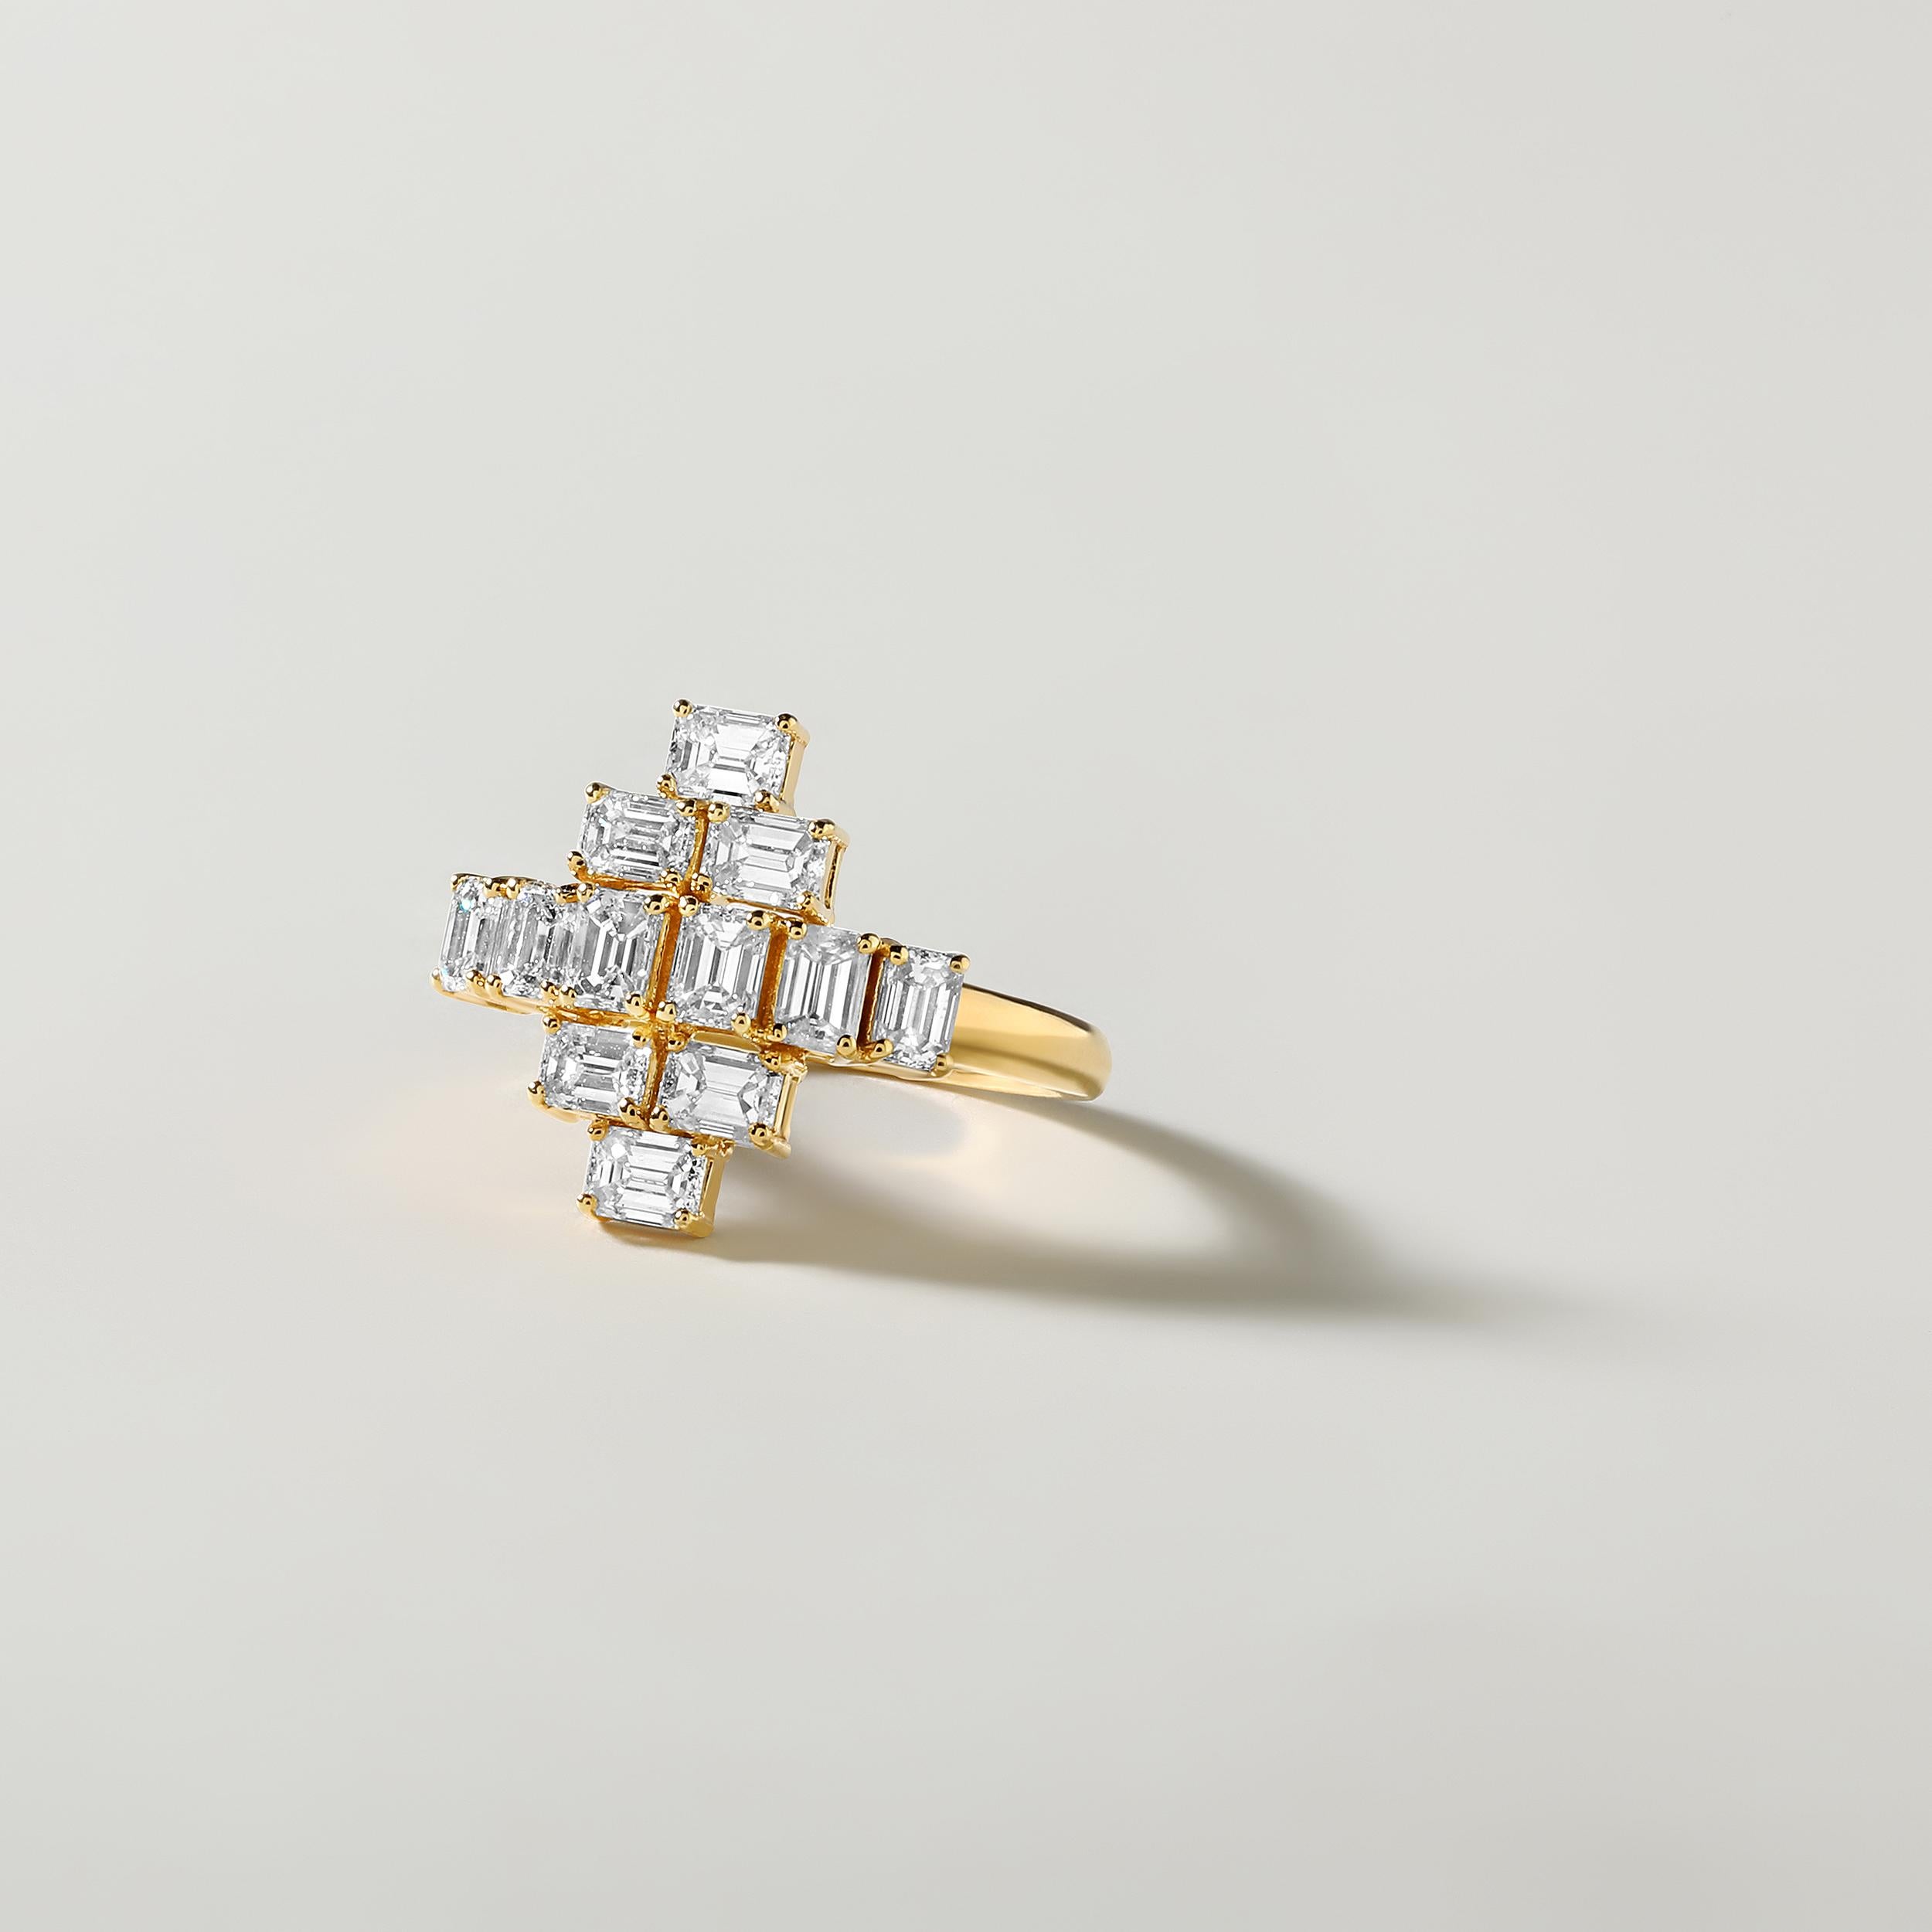 Ring Size: US 8

Crafted in 4.52 grams of 18K Yellow Gold, the ring contains 12 stones of Baguette Natural Diamonds with a total of 1.95 carat in H-I color and VS-SI clarity.

CONTEMPORARY AND TIMELESS ESSENCE: Crafted in 14-karat/18-karat with 100%